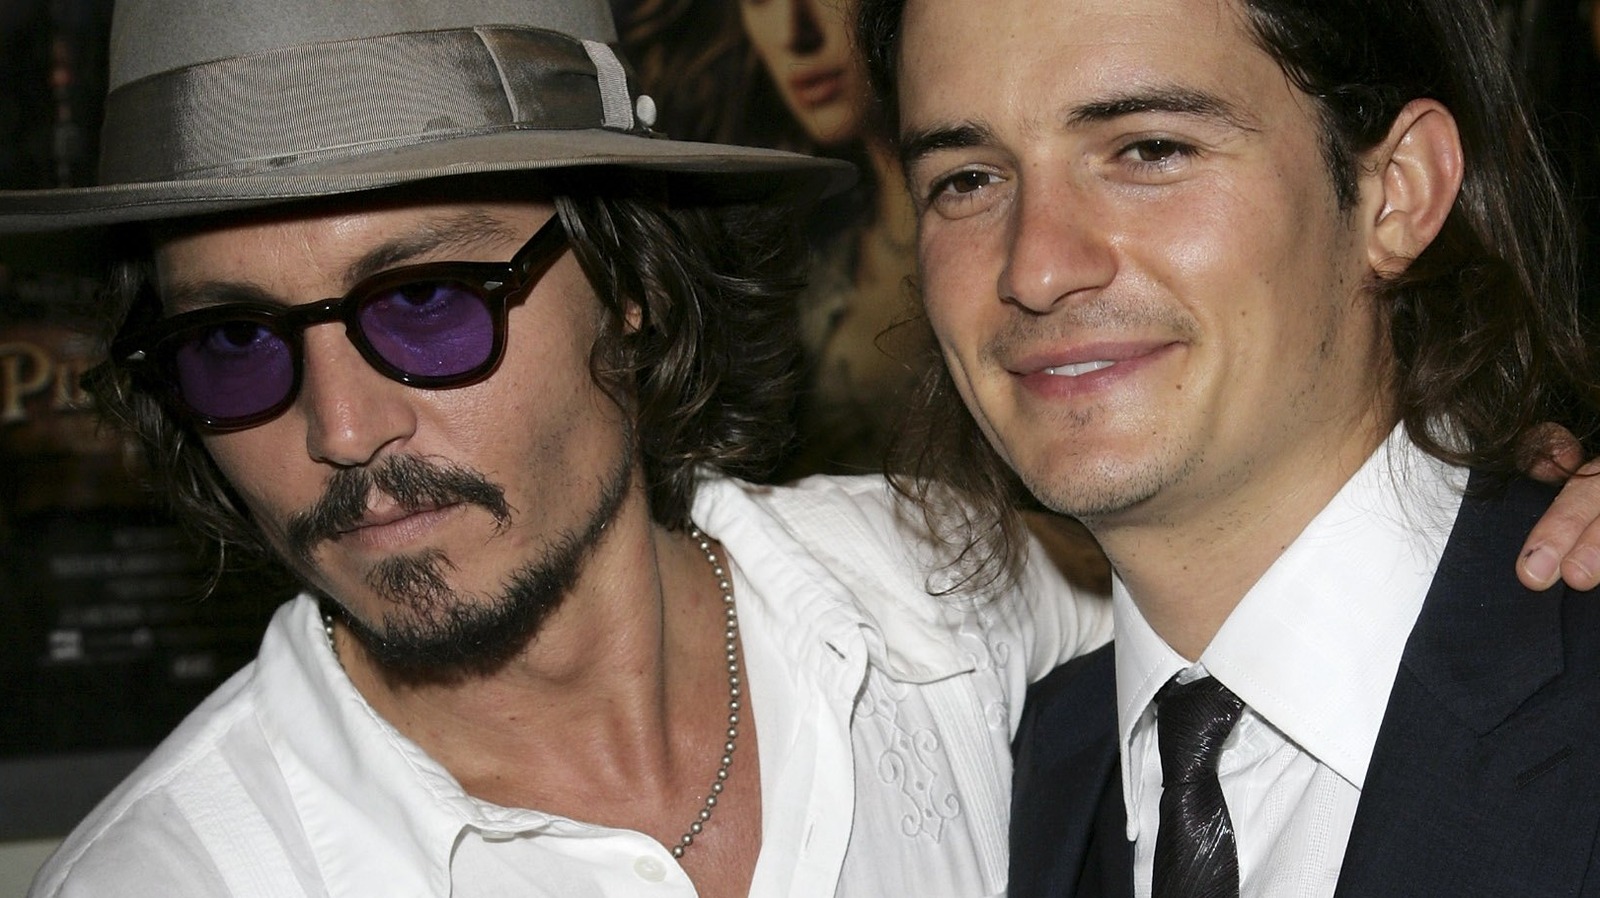 The Truth About Johnny Depp And Orlando Bloom's Friendship